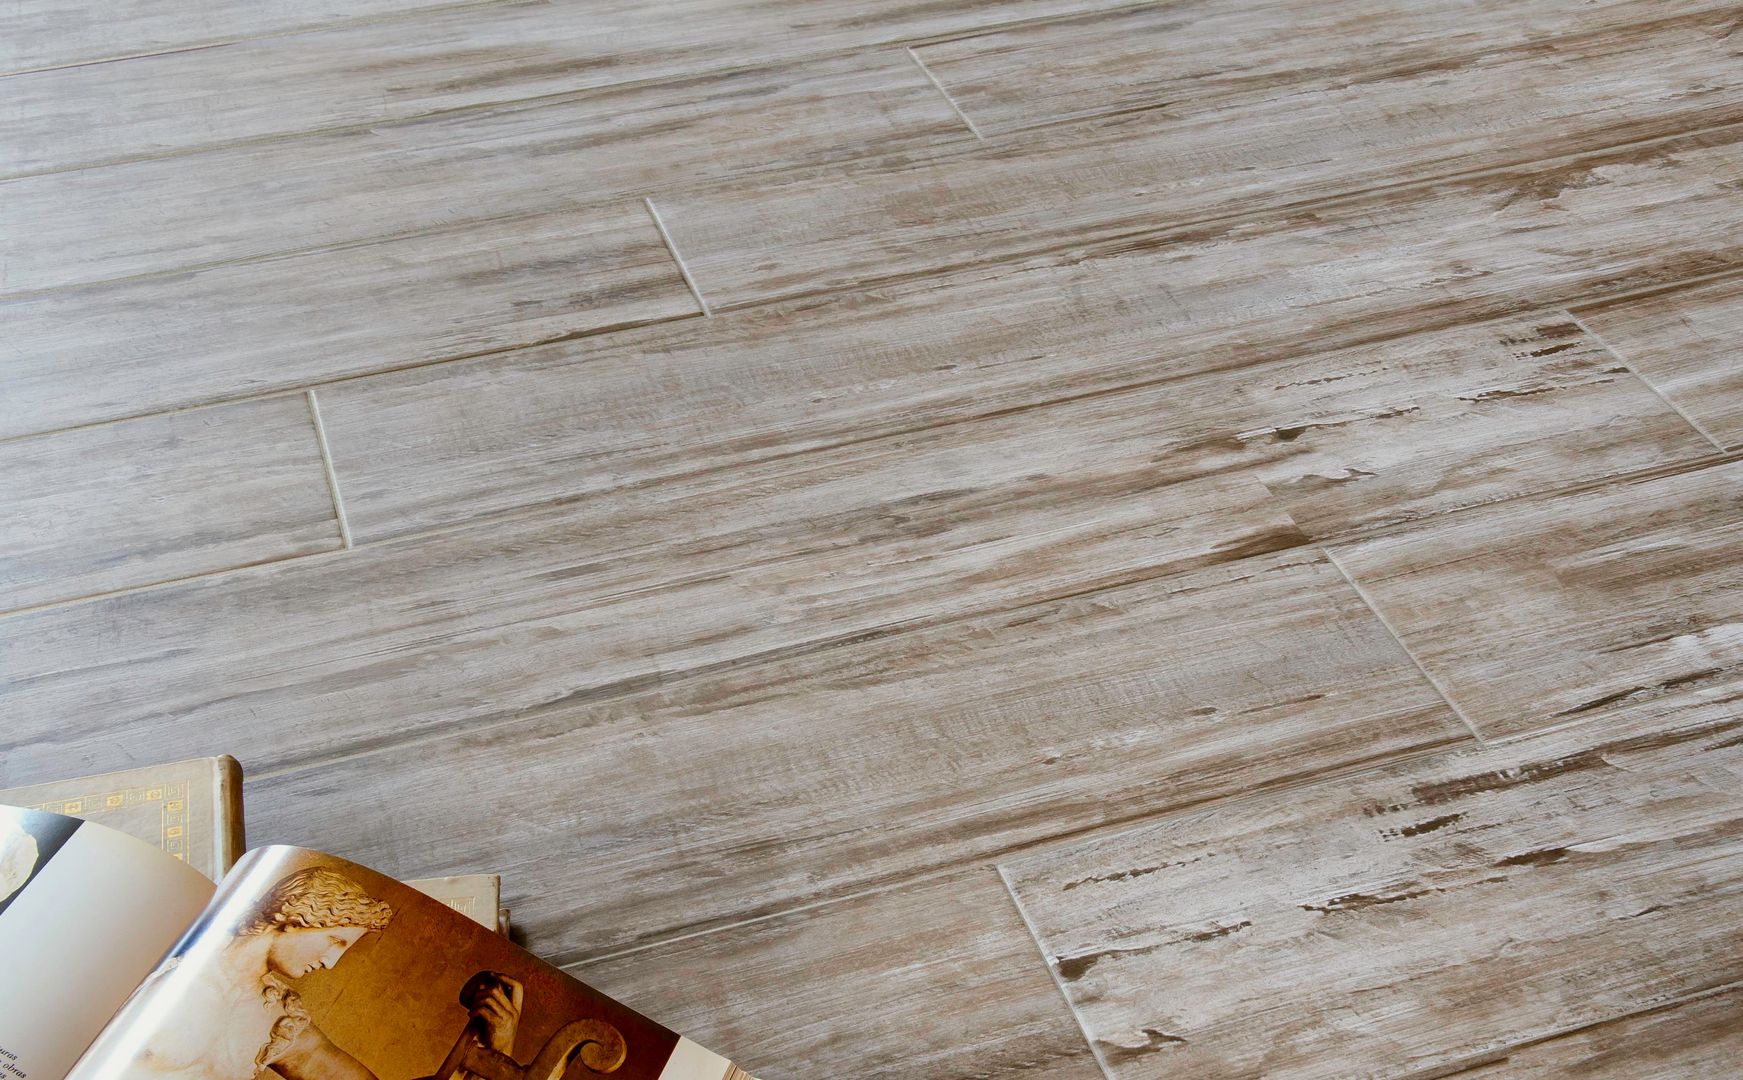 Loxley Nut Distressed Wood Effect Porcelain Tiles The London Tile Co. Rustic style walls & floors Tiles